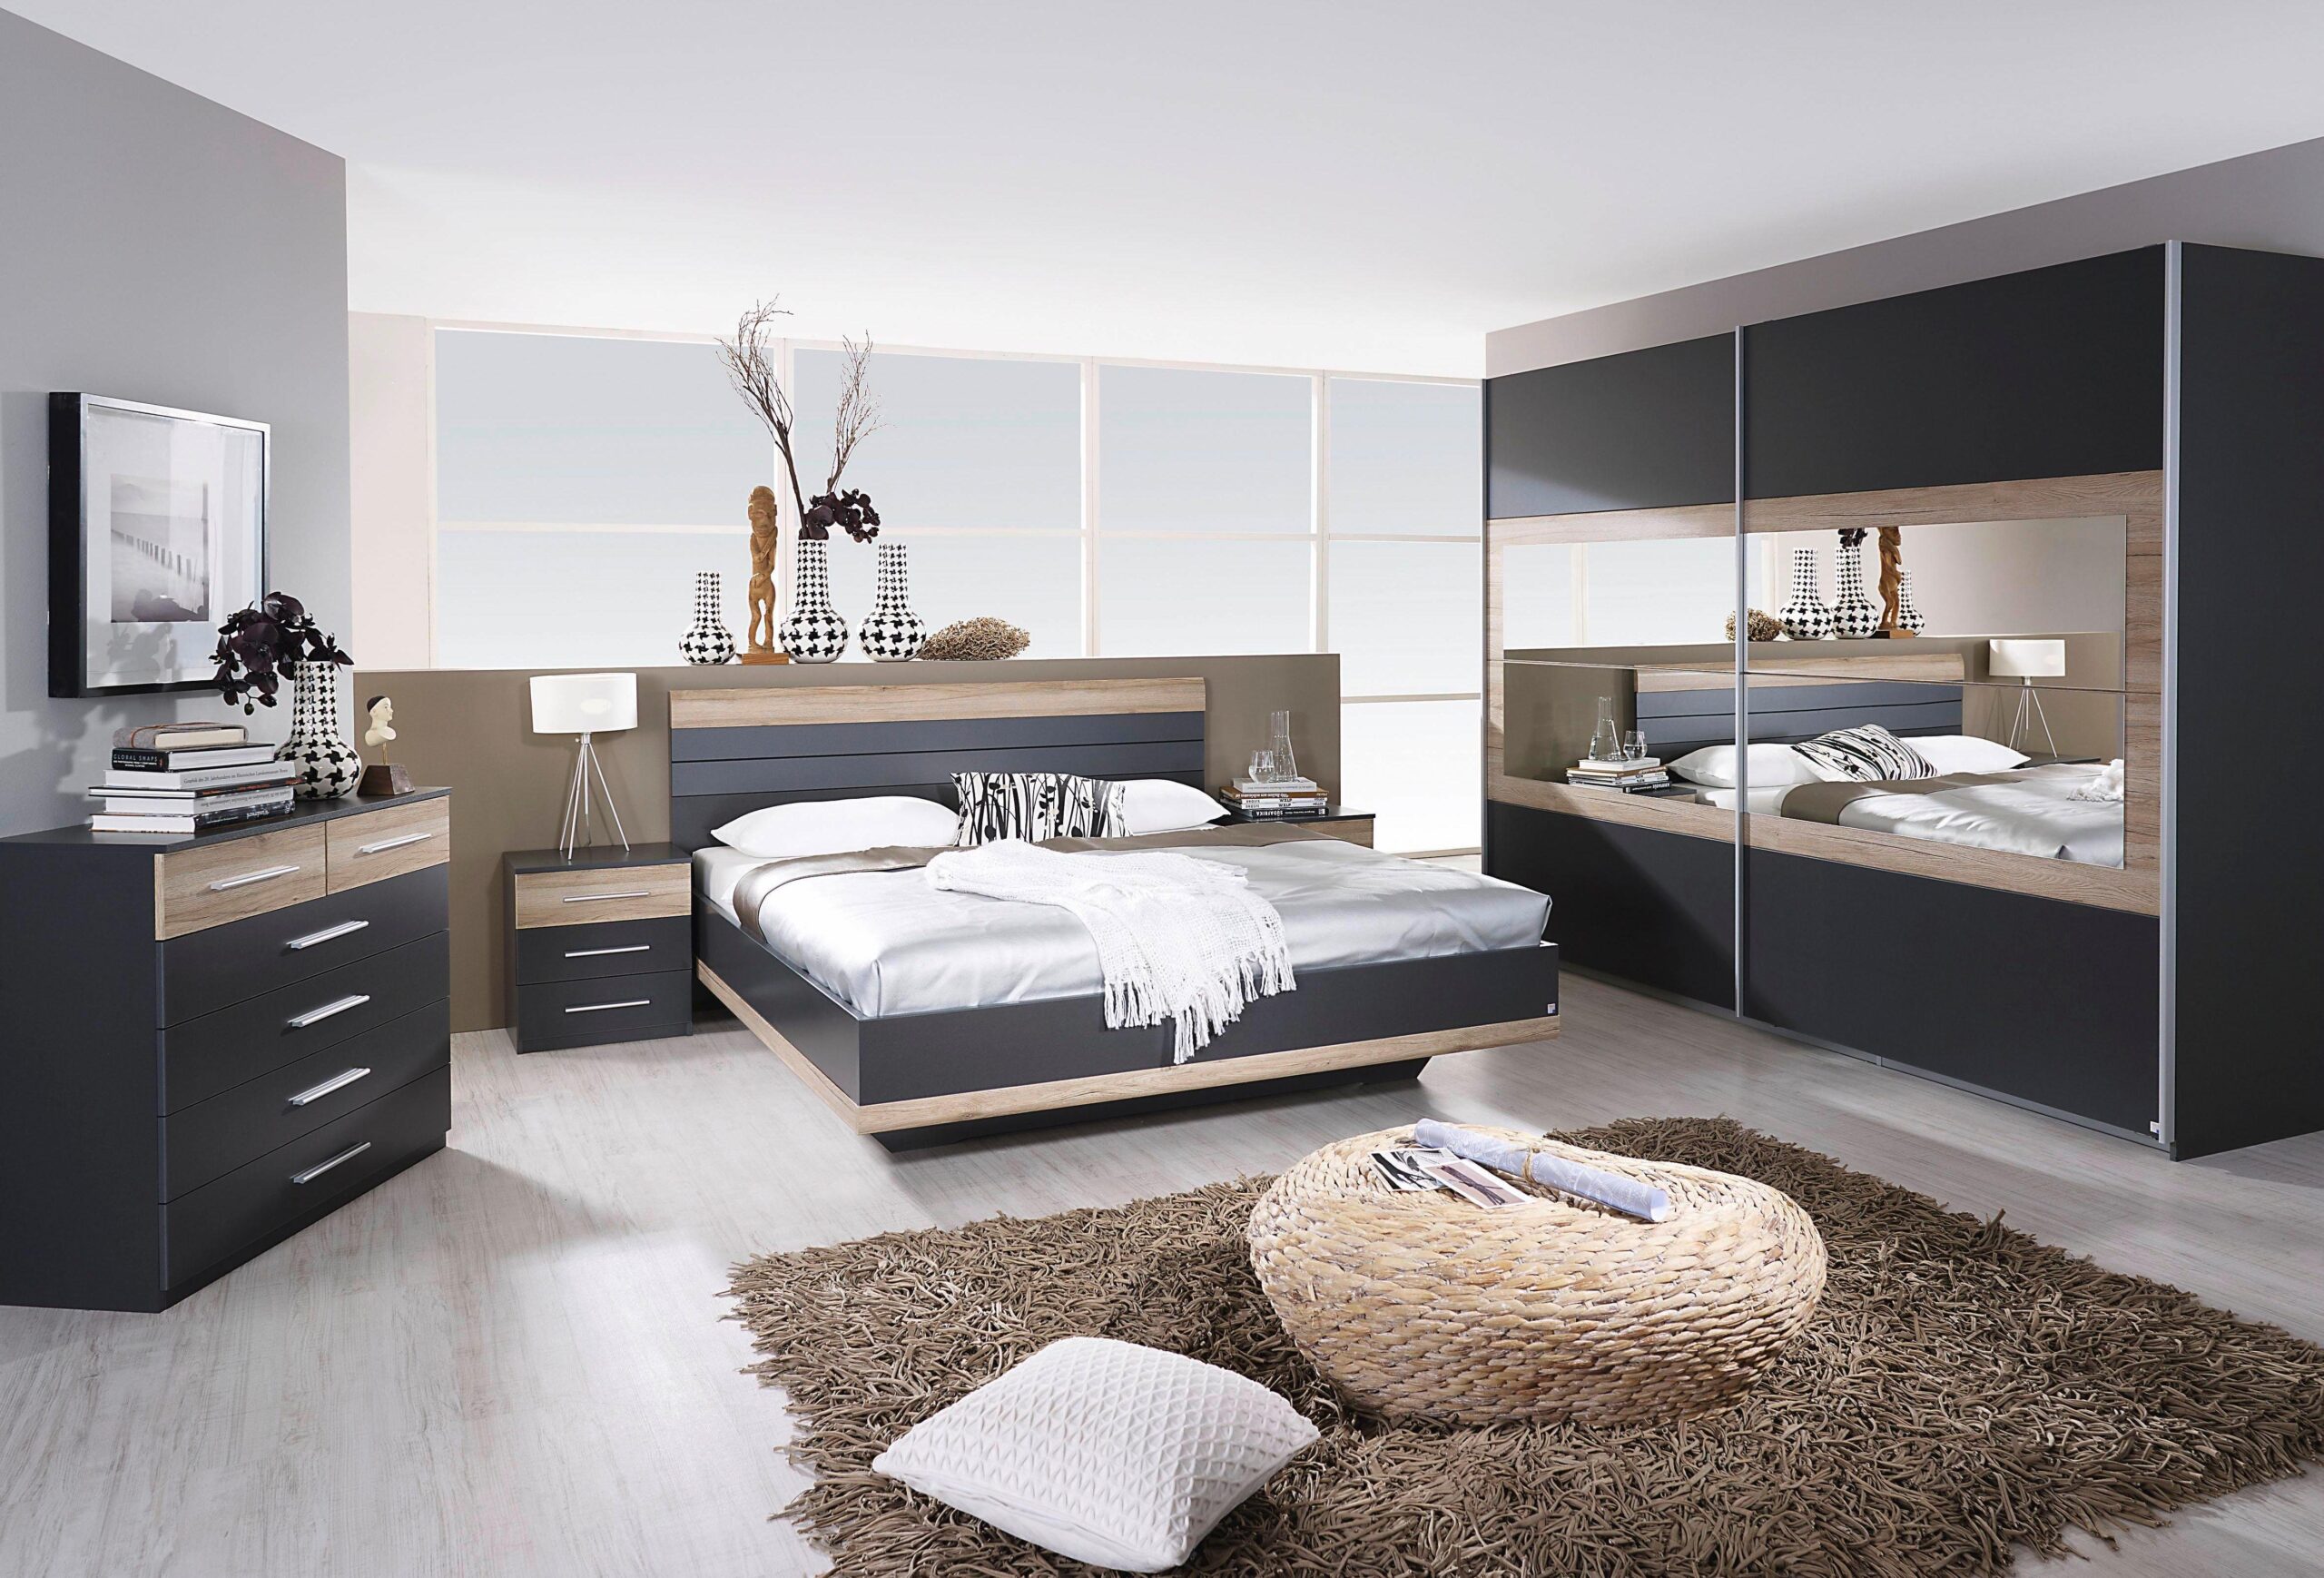 White bedroom sets Make an exclusive choice